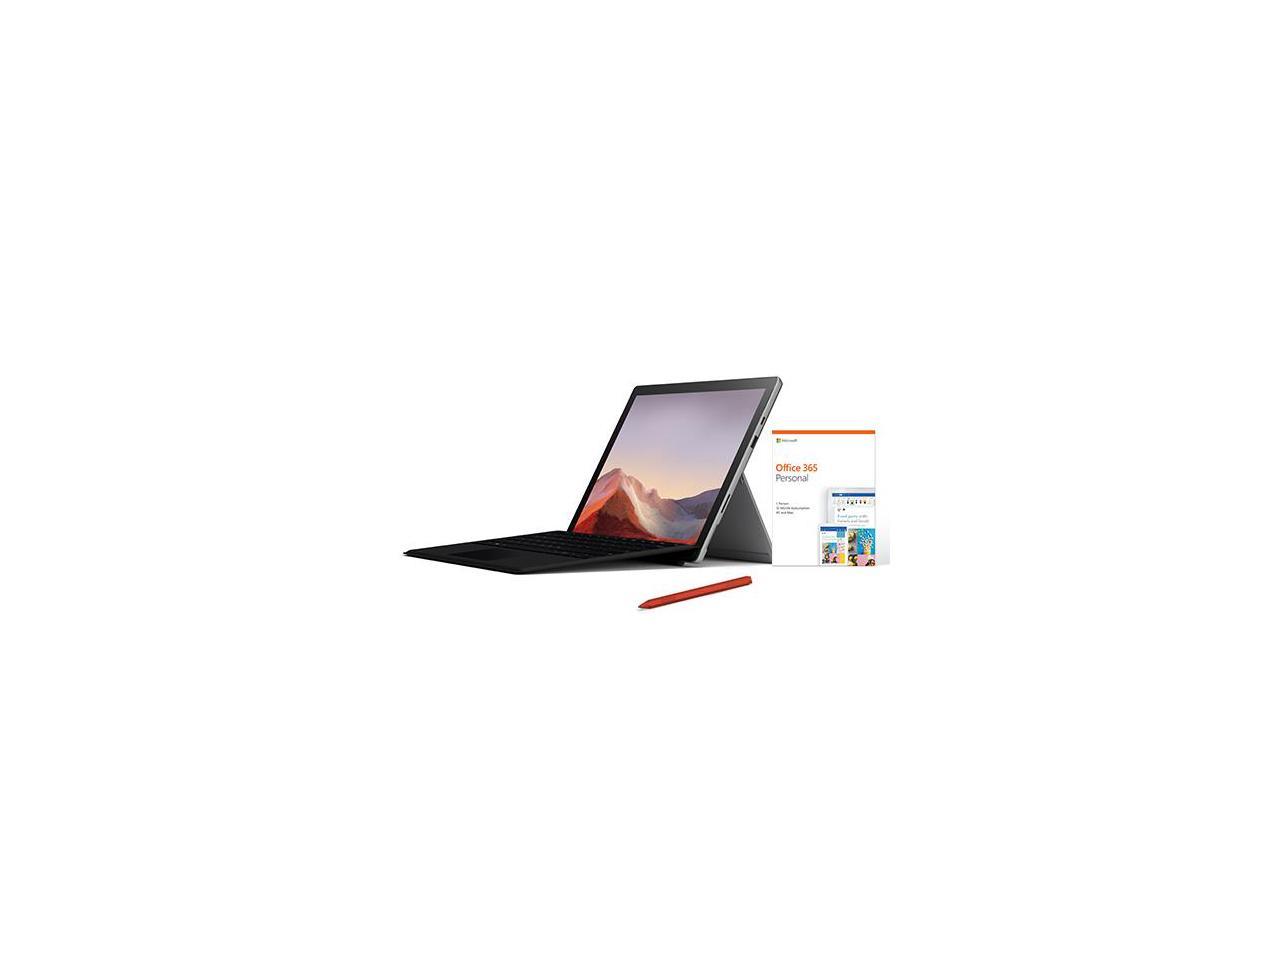 Microsoft Surface Pro 7 12.3\" Intel Core i5 8GB RAM 128GB SSD Platinum + Surface Pro Signature Type Cover Black + Surface Pen Poppy Red + Office 365 Personal 1 Year